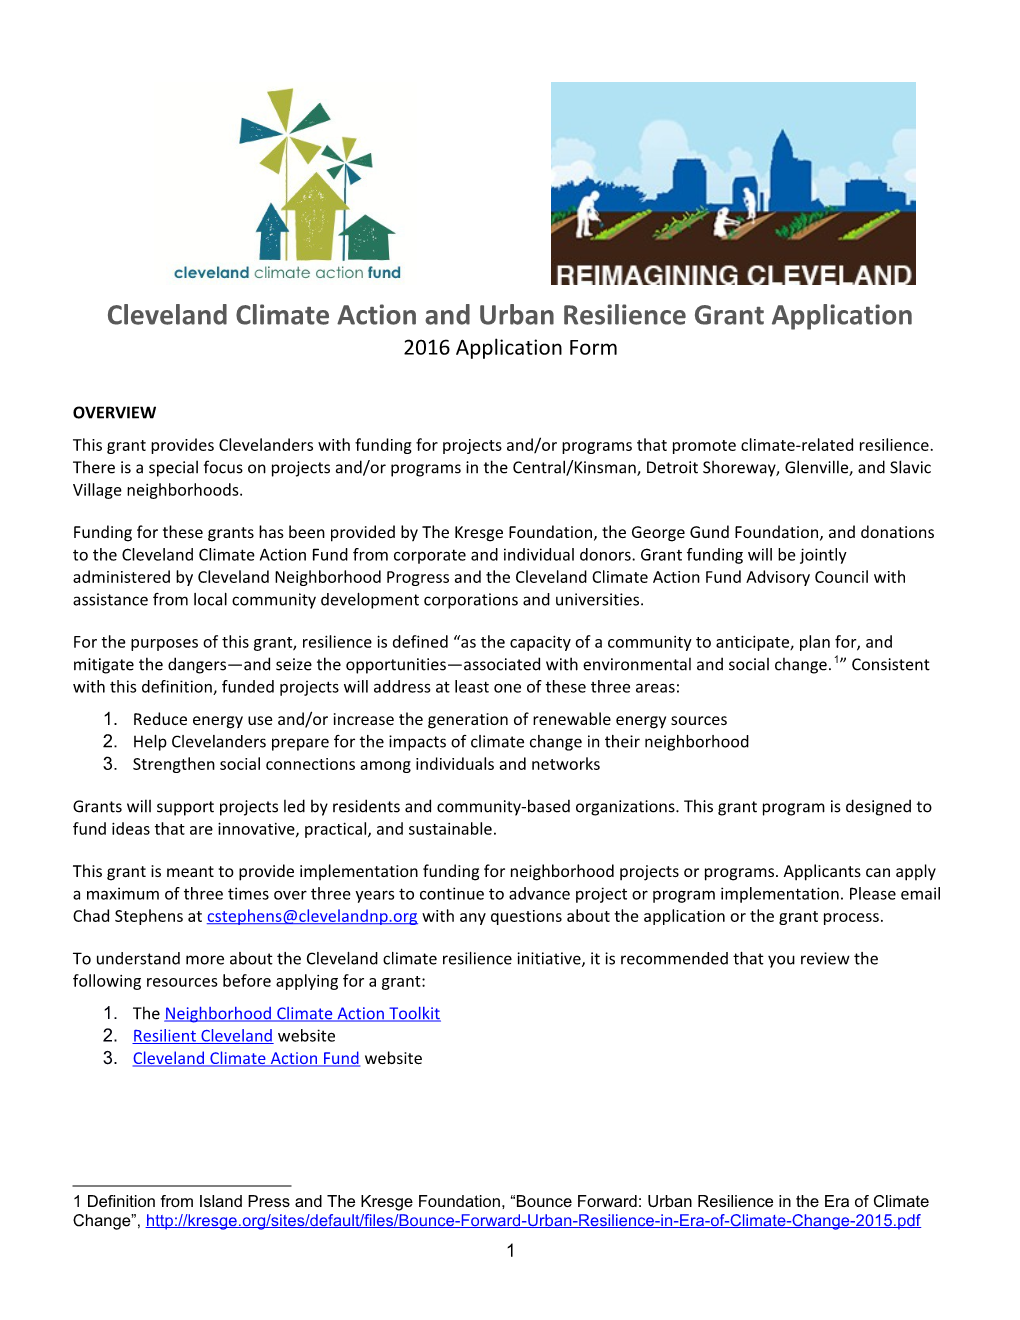 Cleveland Climate Action and Urban Resilience Grant Application